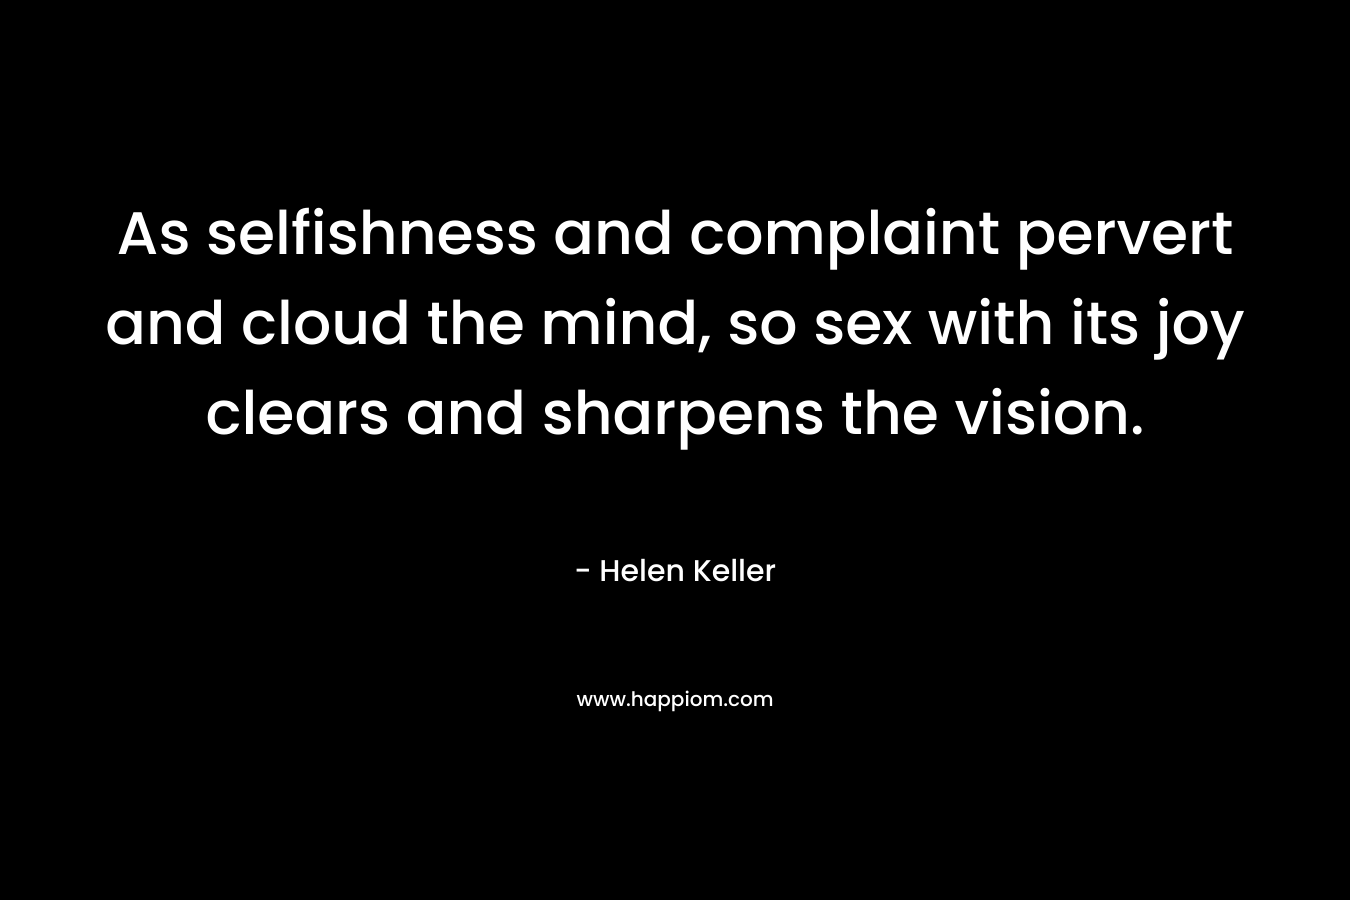 As selfishness and complaint pervert and cloud the mind, so sex with its joy clears and sharpens the vision.